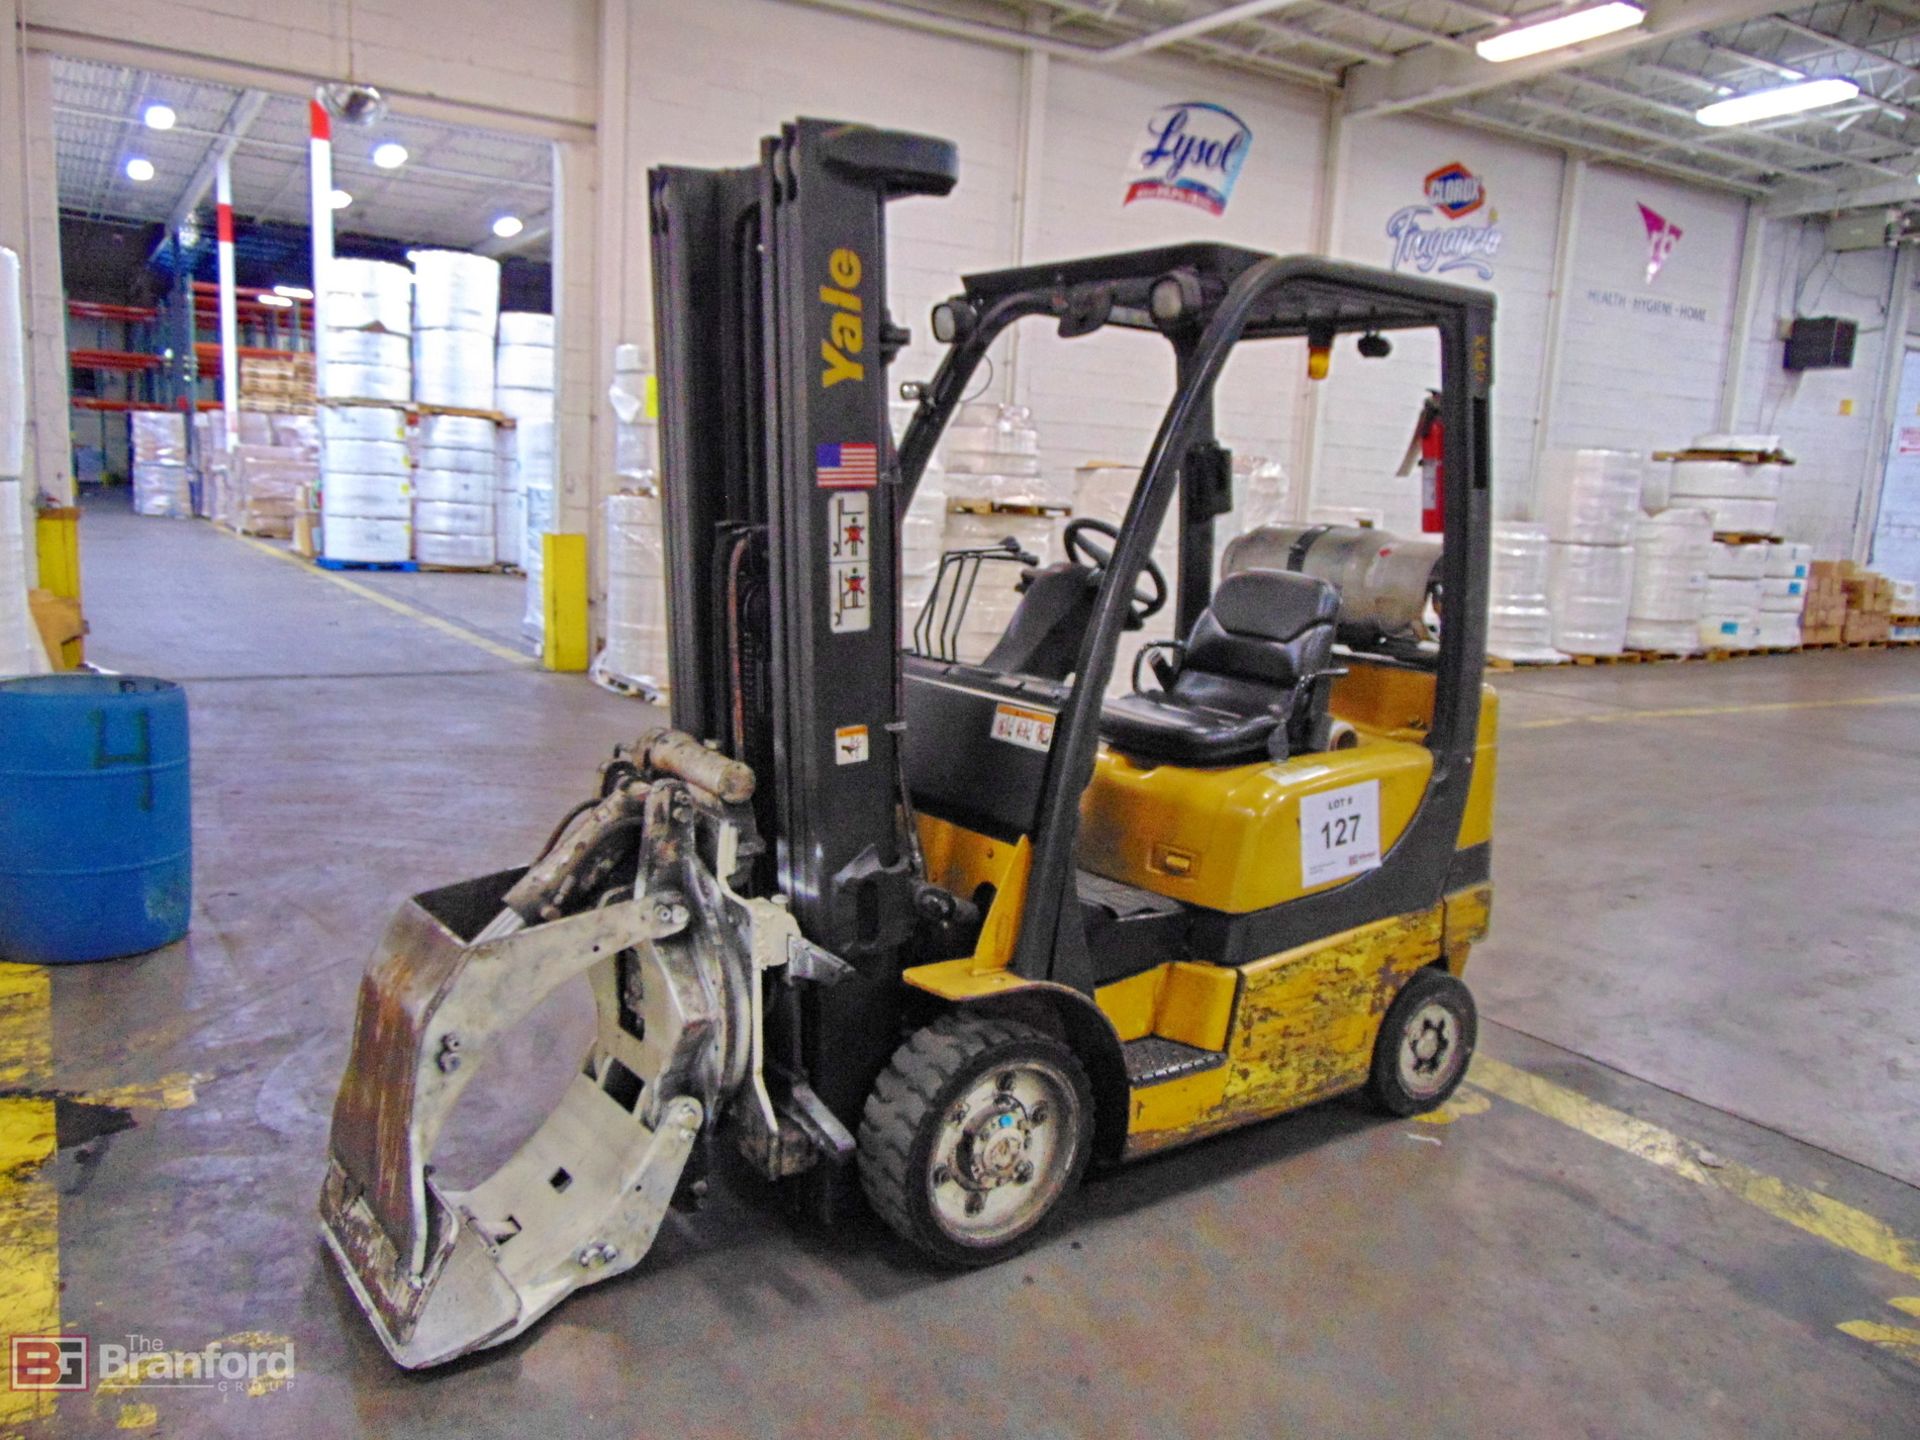 Yale model GLC05VXNURE088 5000-Lb cap. Roll clamp forklift - Image 2 of 5